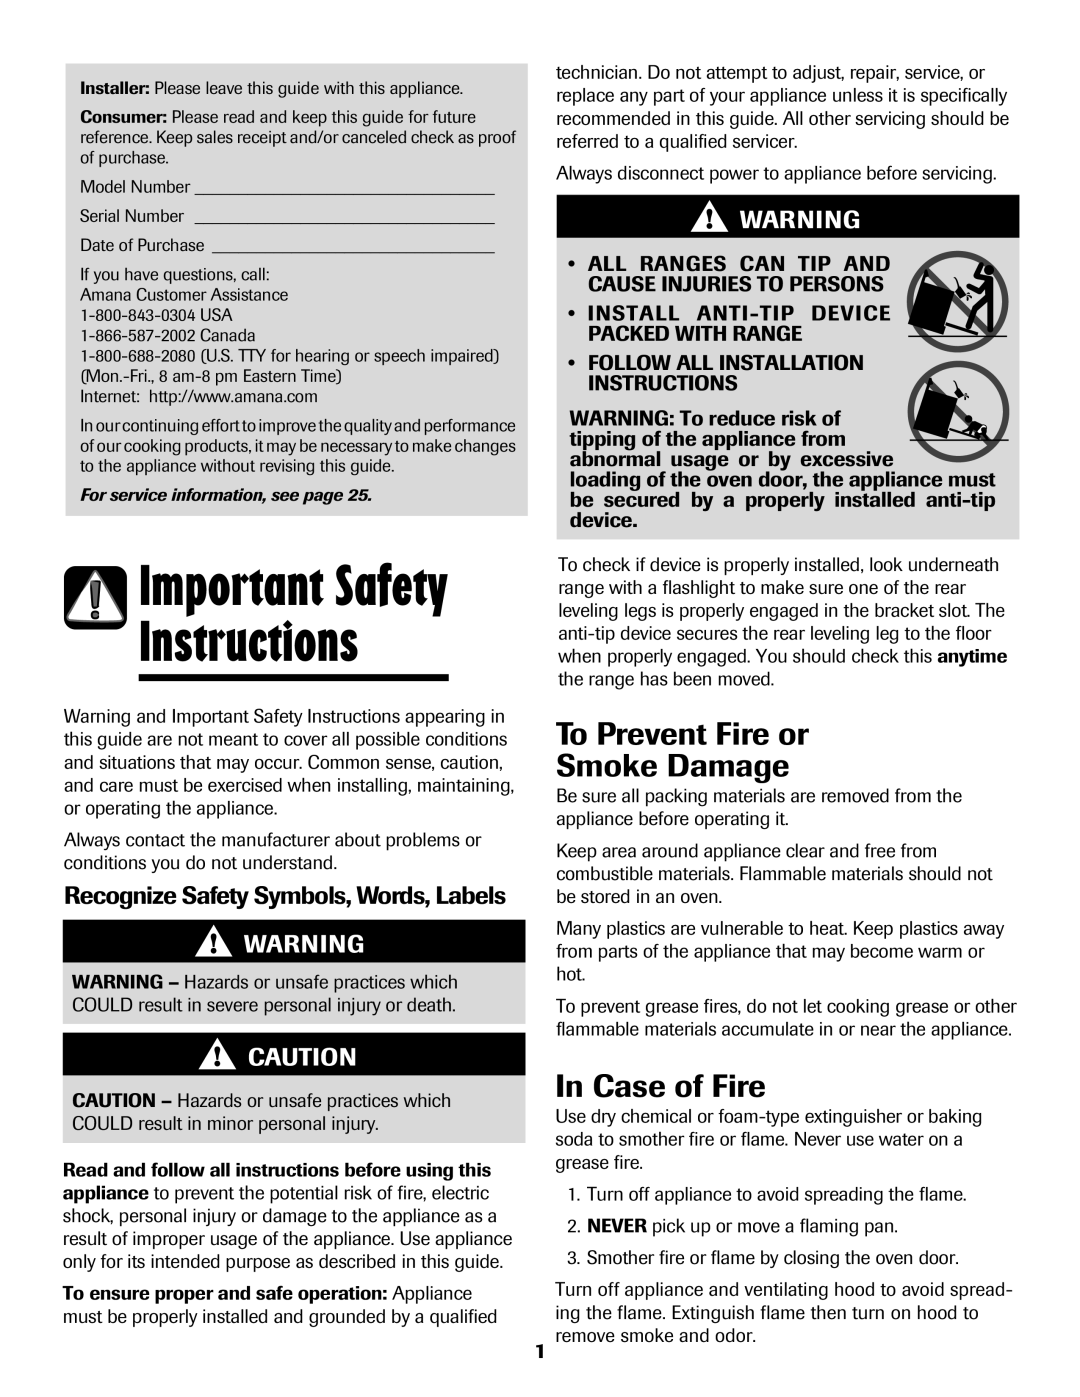 Amana 8113P487-60 Instructions, Important Safety, To Prevent Fire or Smoke Damage, In Case of Fire 